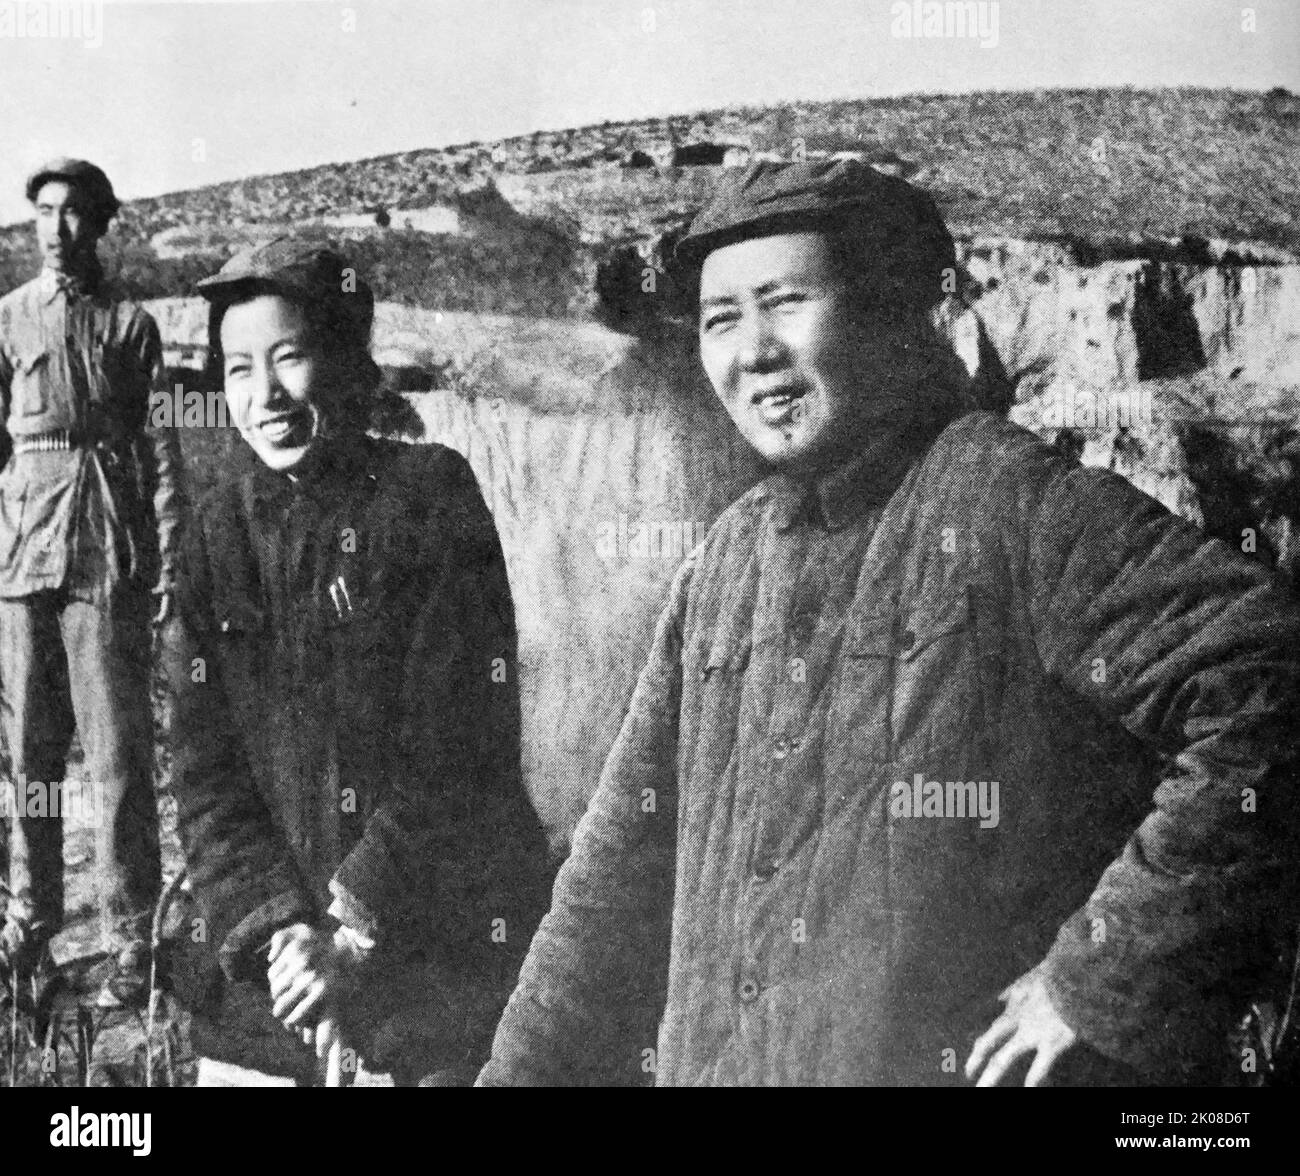 Chiang Ch'ing and Mao in the hills in Yenan. Jiang Qing (19 March 1914 - 14 May 1991), also known as Madame Mao, was a Chinese communist revolutionary, actress, and major political figure during the Cultural Revolution (1966-1976). She was the fourth wife of Mao Zedong, the Chairman of the Communist Party and Paramount leader of China Stock Photo